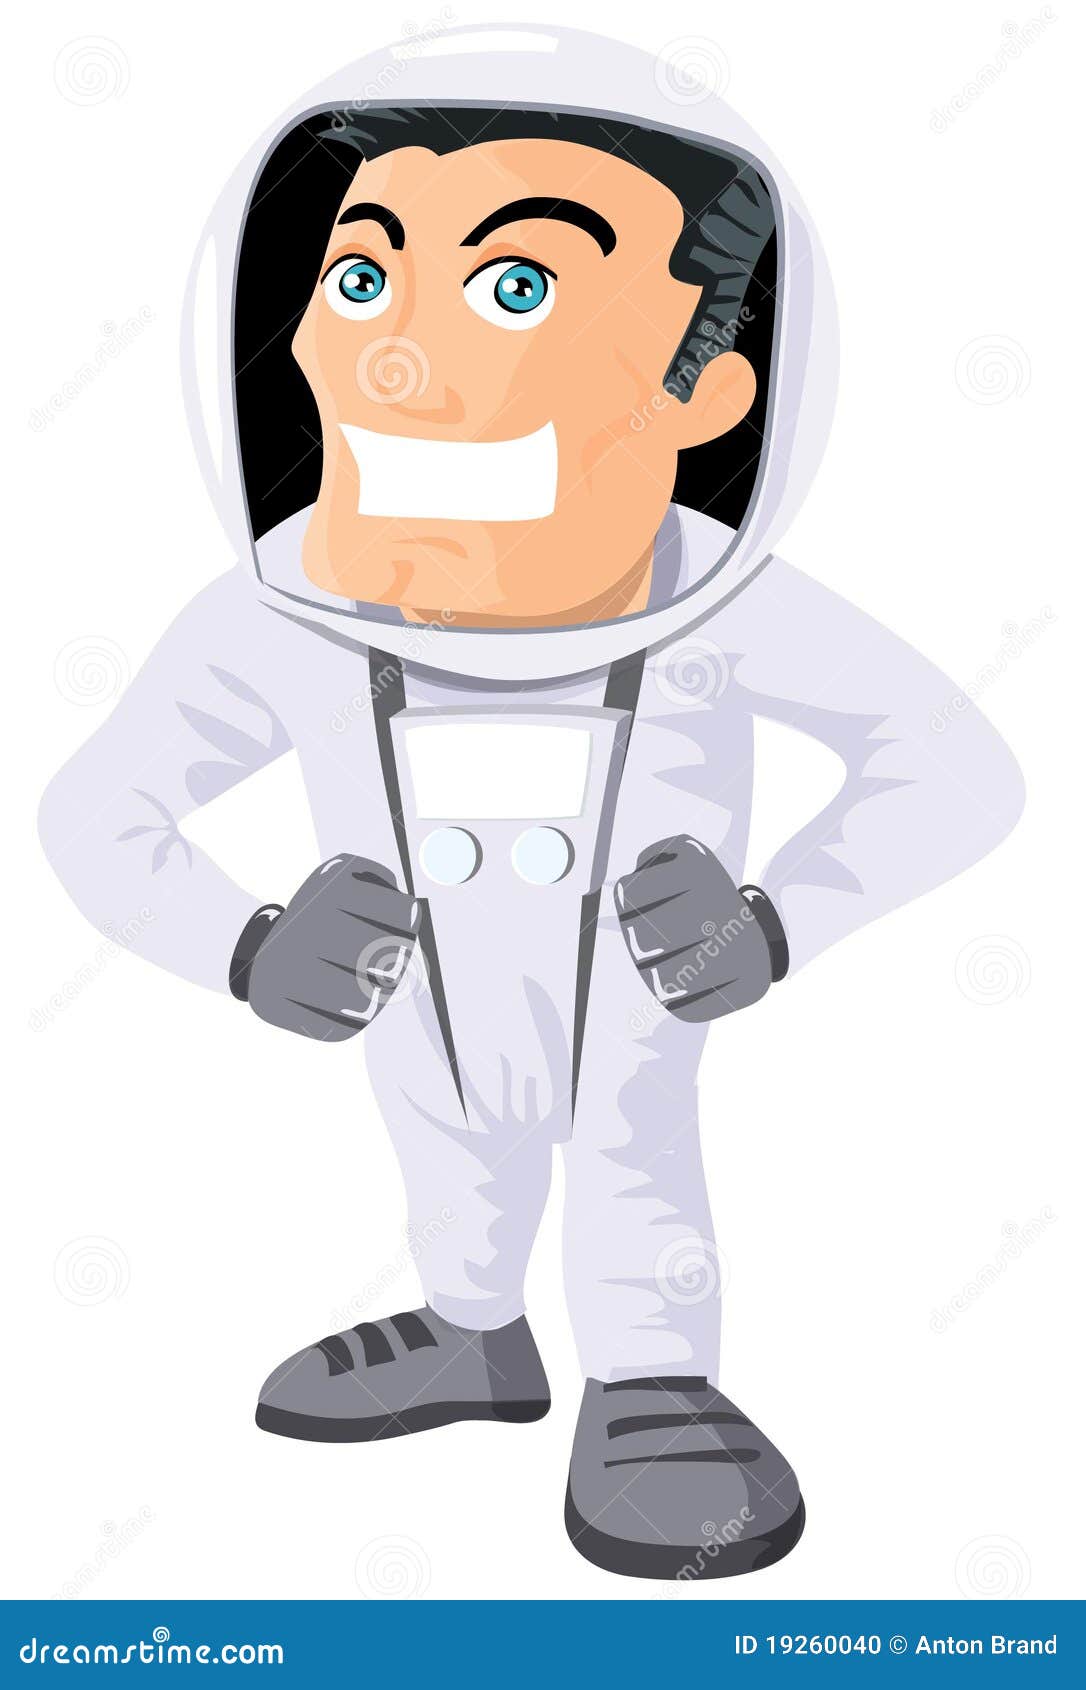 Cartoon Astronaout In A Space Suit Stock Vector - Image: 19260040